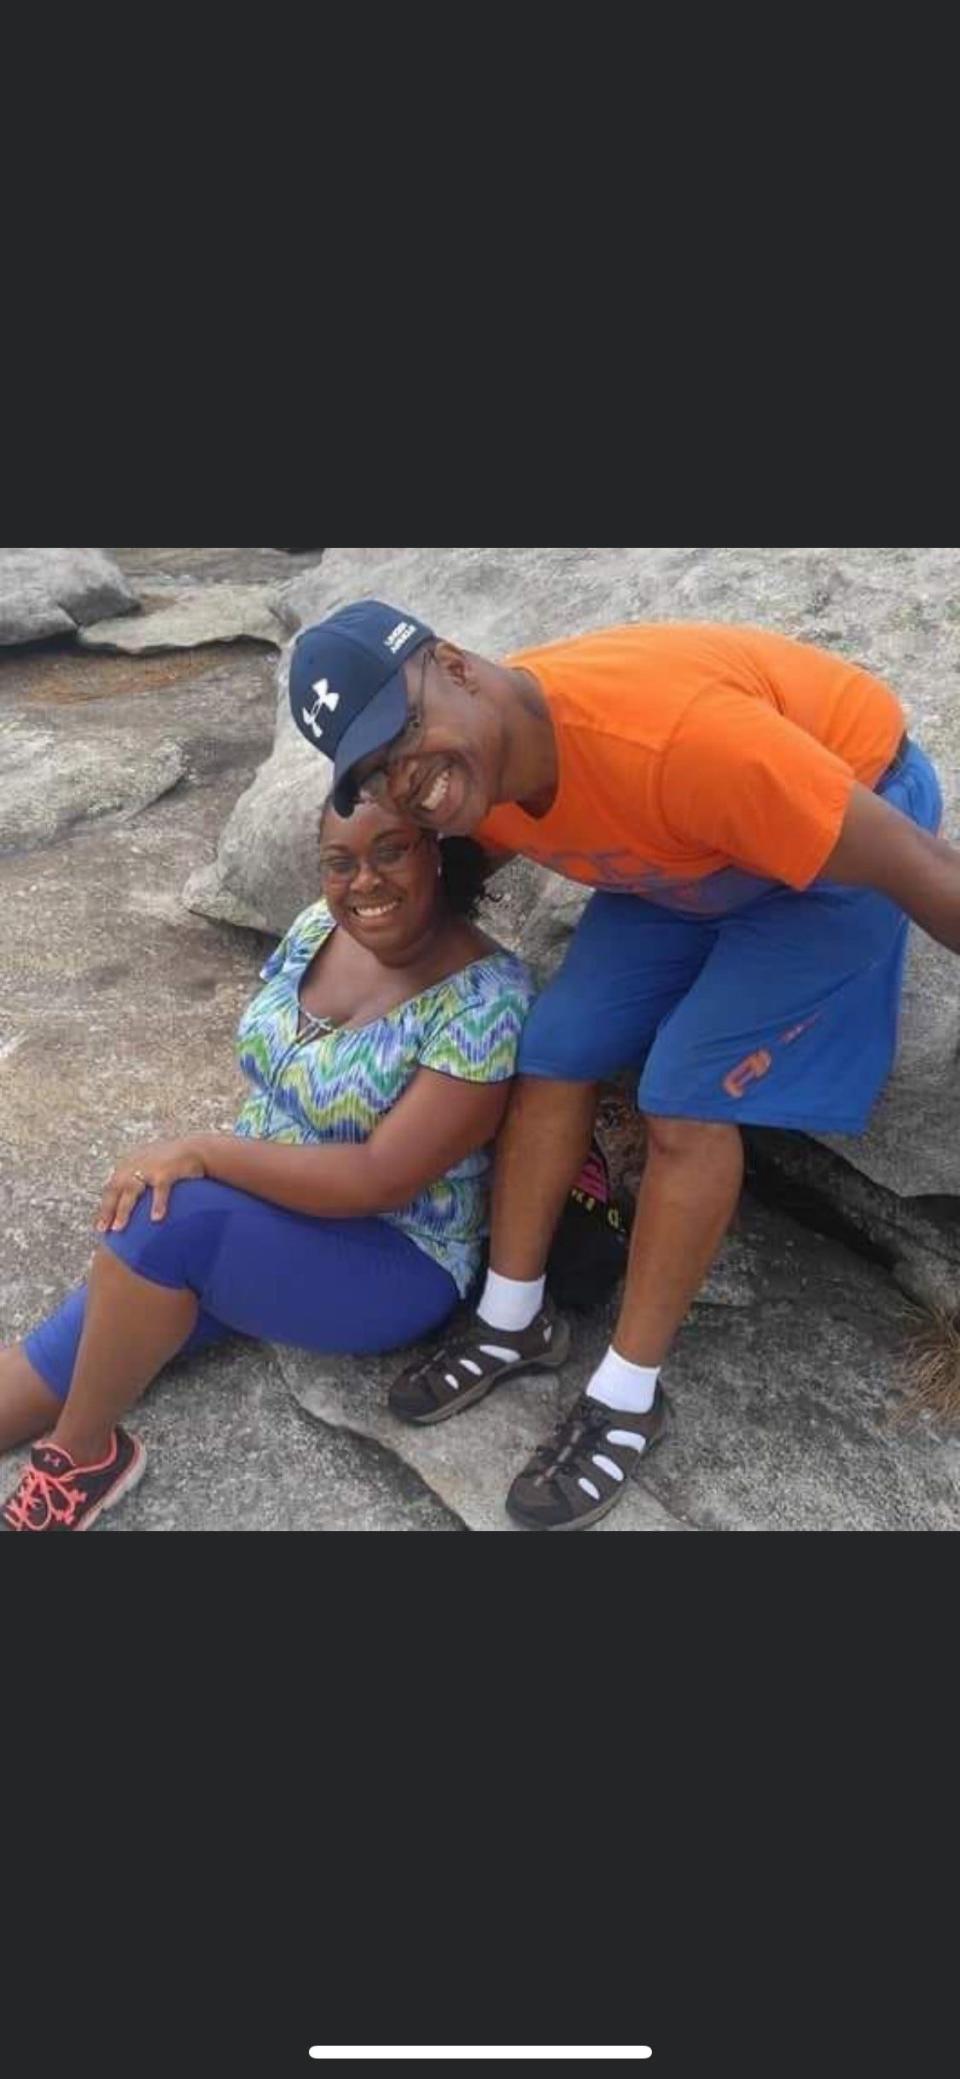 Aaron Salter Jr. with his daughter, Latisha Slaughter on a 2016 trip to Stone Mountain, Georgia. Salter, a security guard at Tops Friendly Markets in Buffalo, was slain in a mass shooting on May 14, 2022.